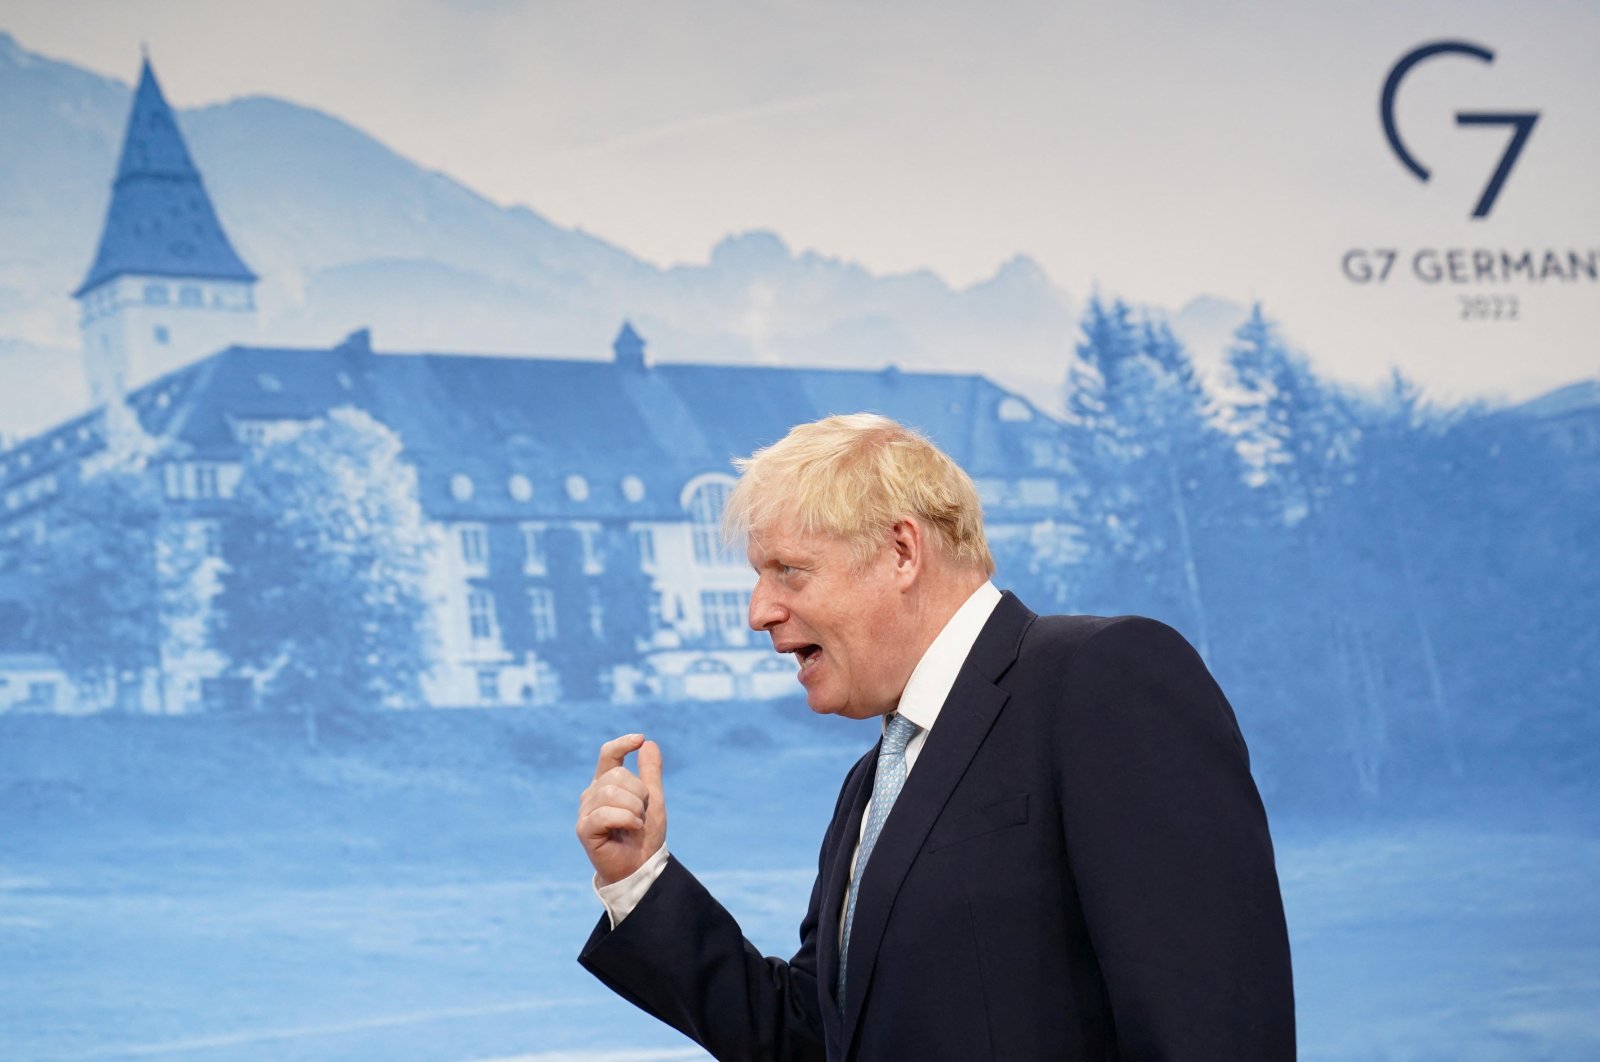 British Prime Minister Boris Johnson takes part in TV interviews during the G-7 summit in Schloss Elmau, in the Bavarian Alps, Germany, June 26, 2022. (Reuters Photo)